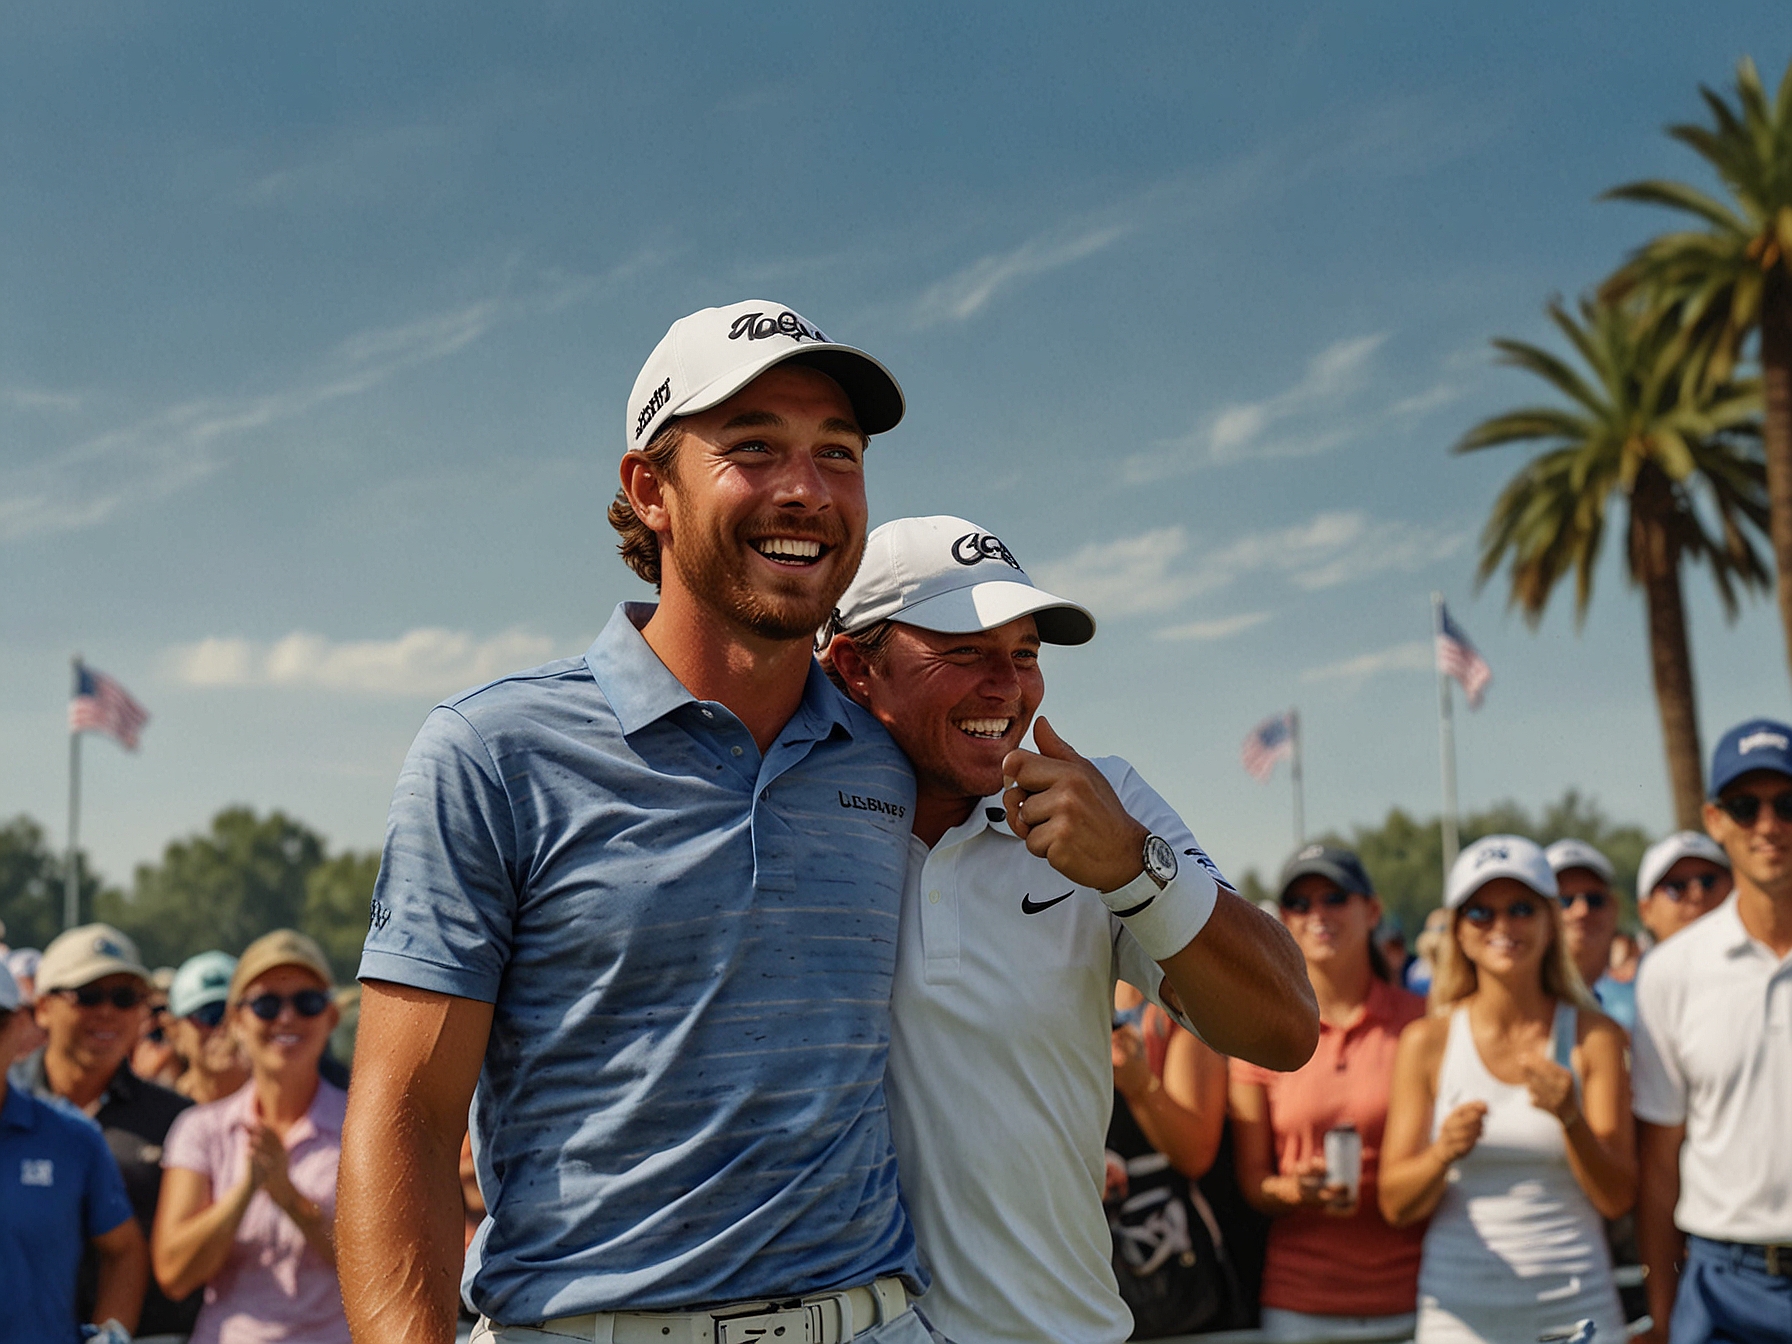 Sam Burns celebrates with his caddie after securing his top-10 finish at the U.S. Open, surrounded by cheering fans, capturing the success and support of his journey.